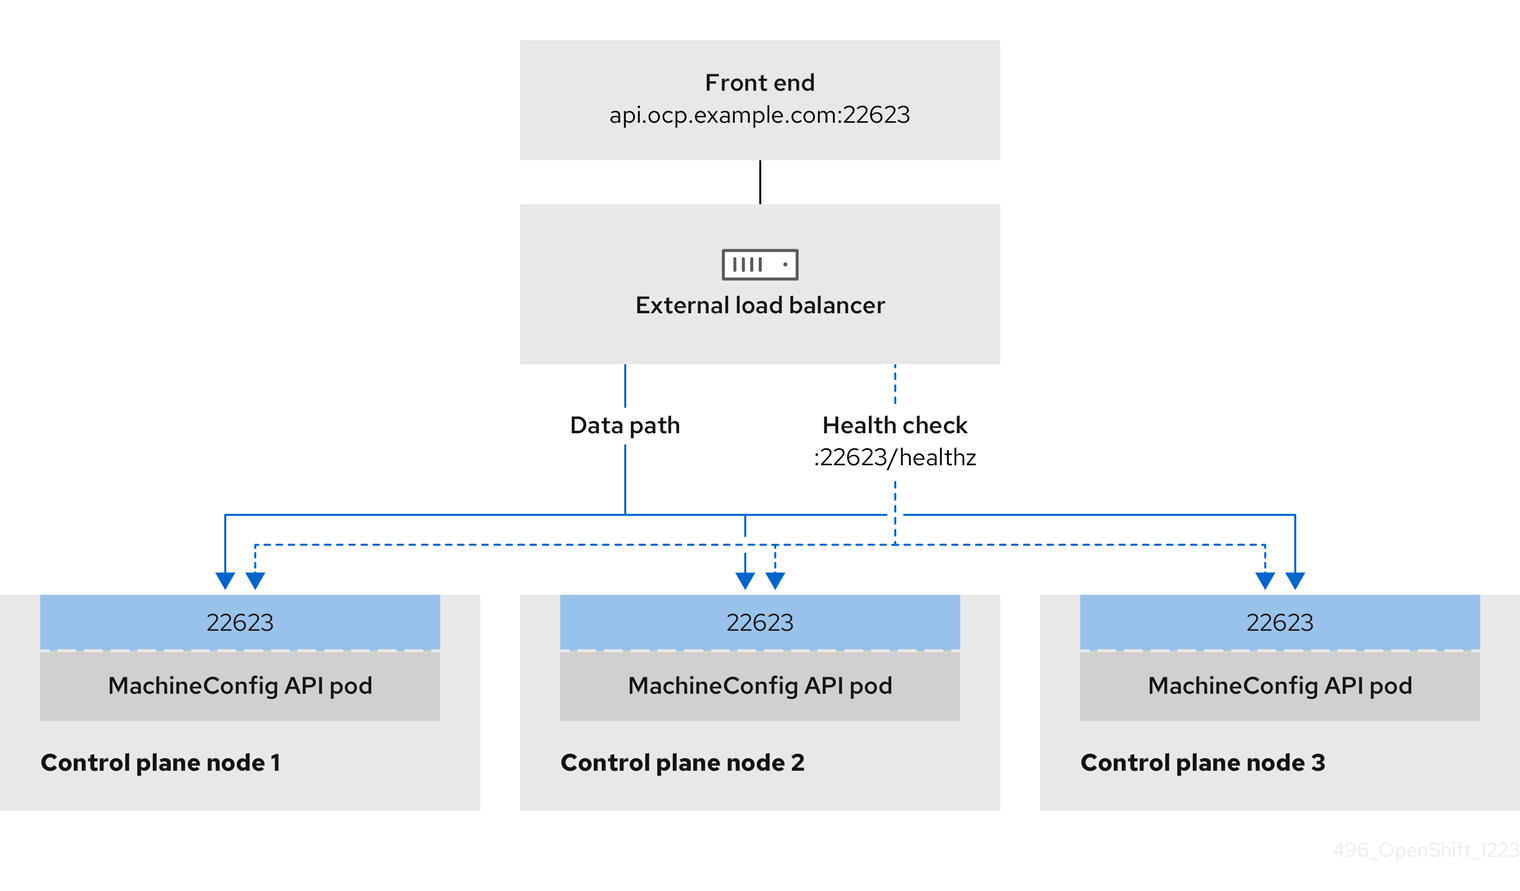 An image that shows an example network workflow of an OpenShift MachineConfig API operating in an OpenShift Container Platform environment.